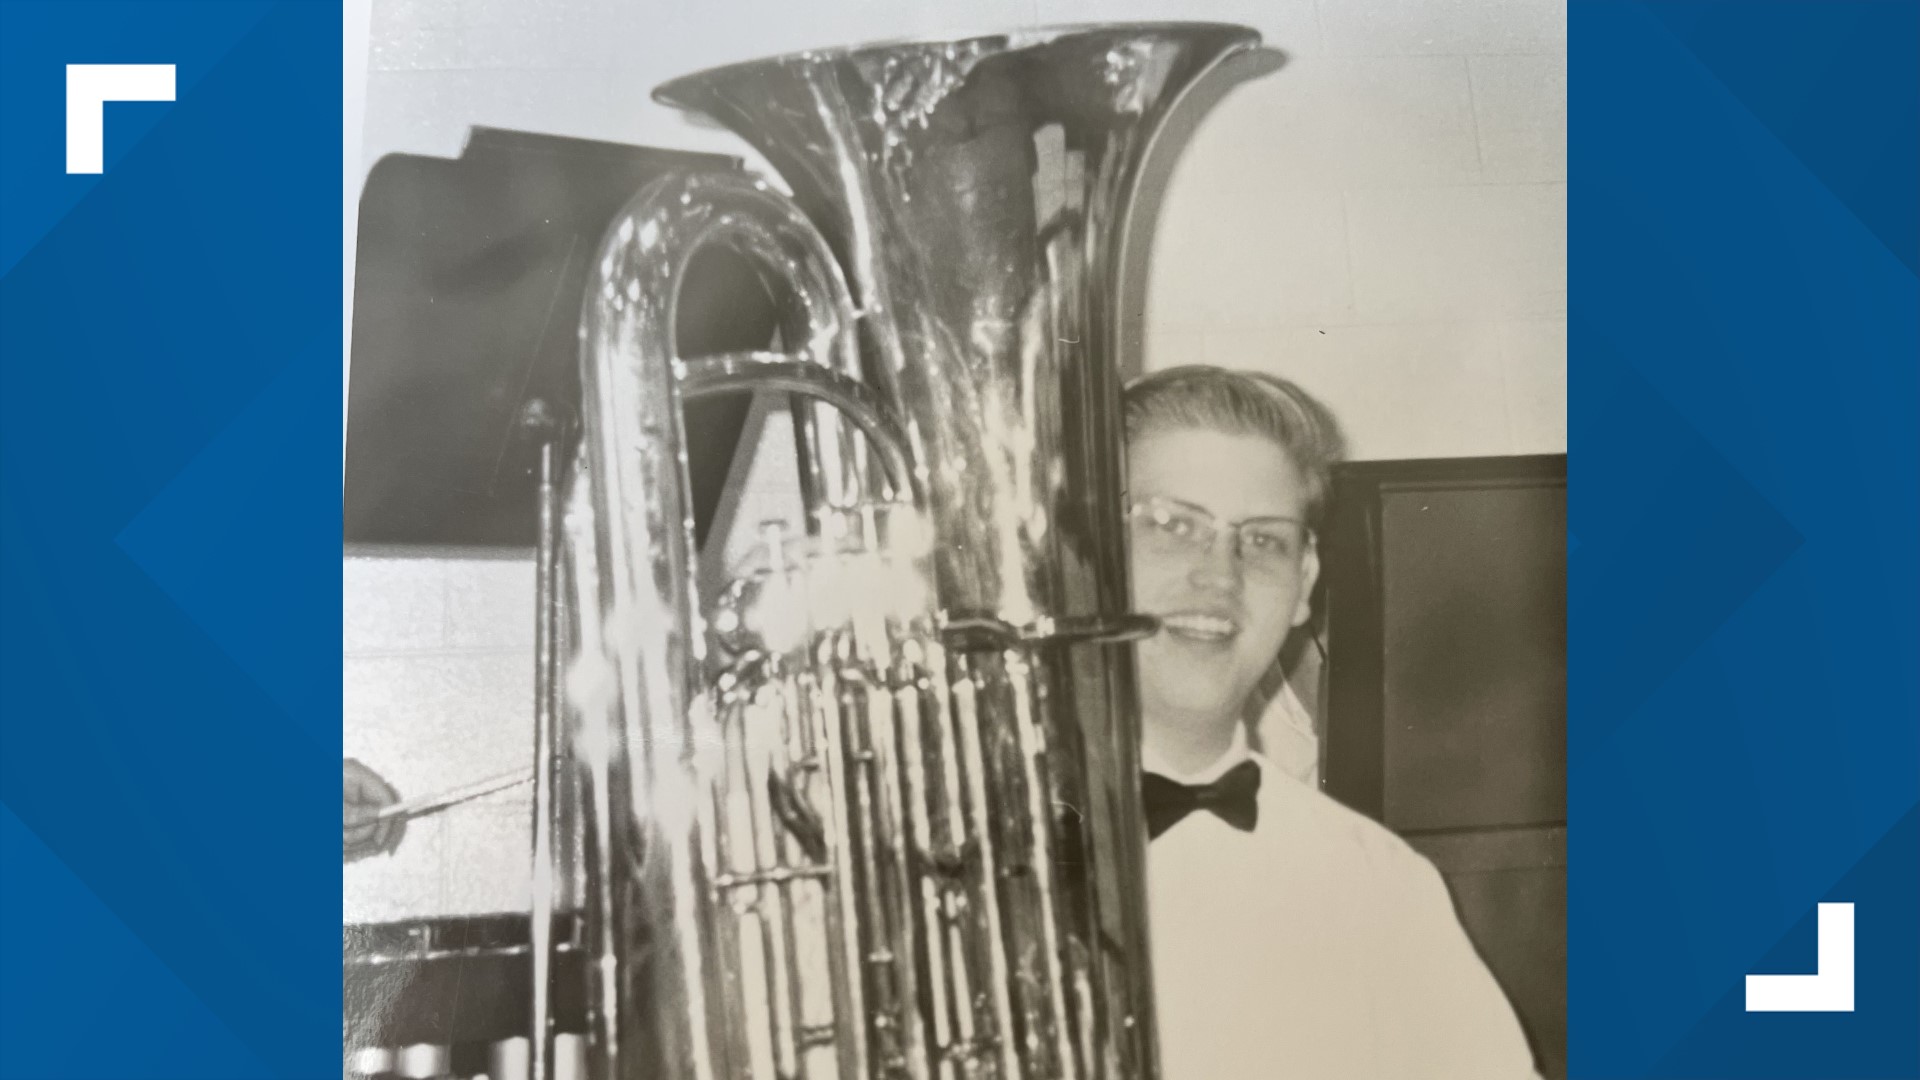 Jonathan Schnicke's passion for music started in fifth grade. Now a band director, he says he loves the opportunity to build relationships with his students.